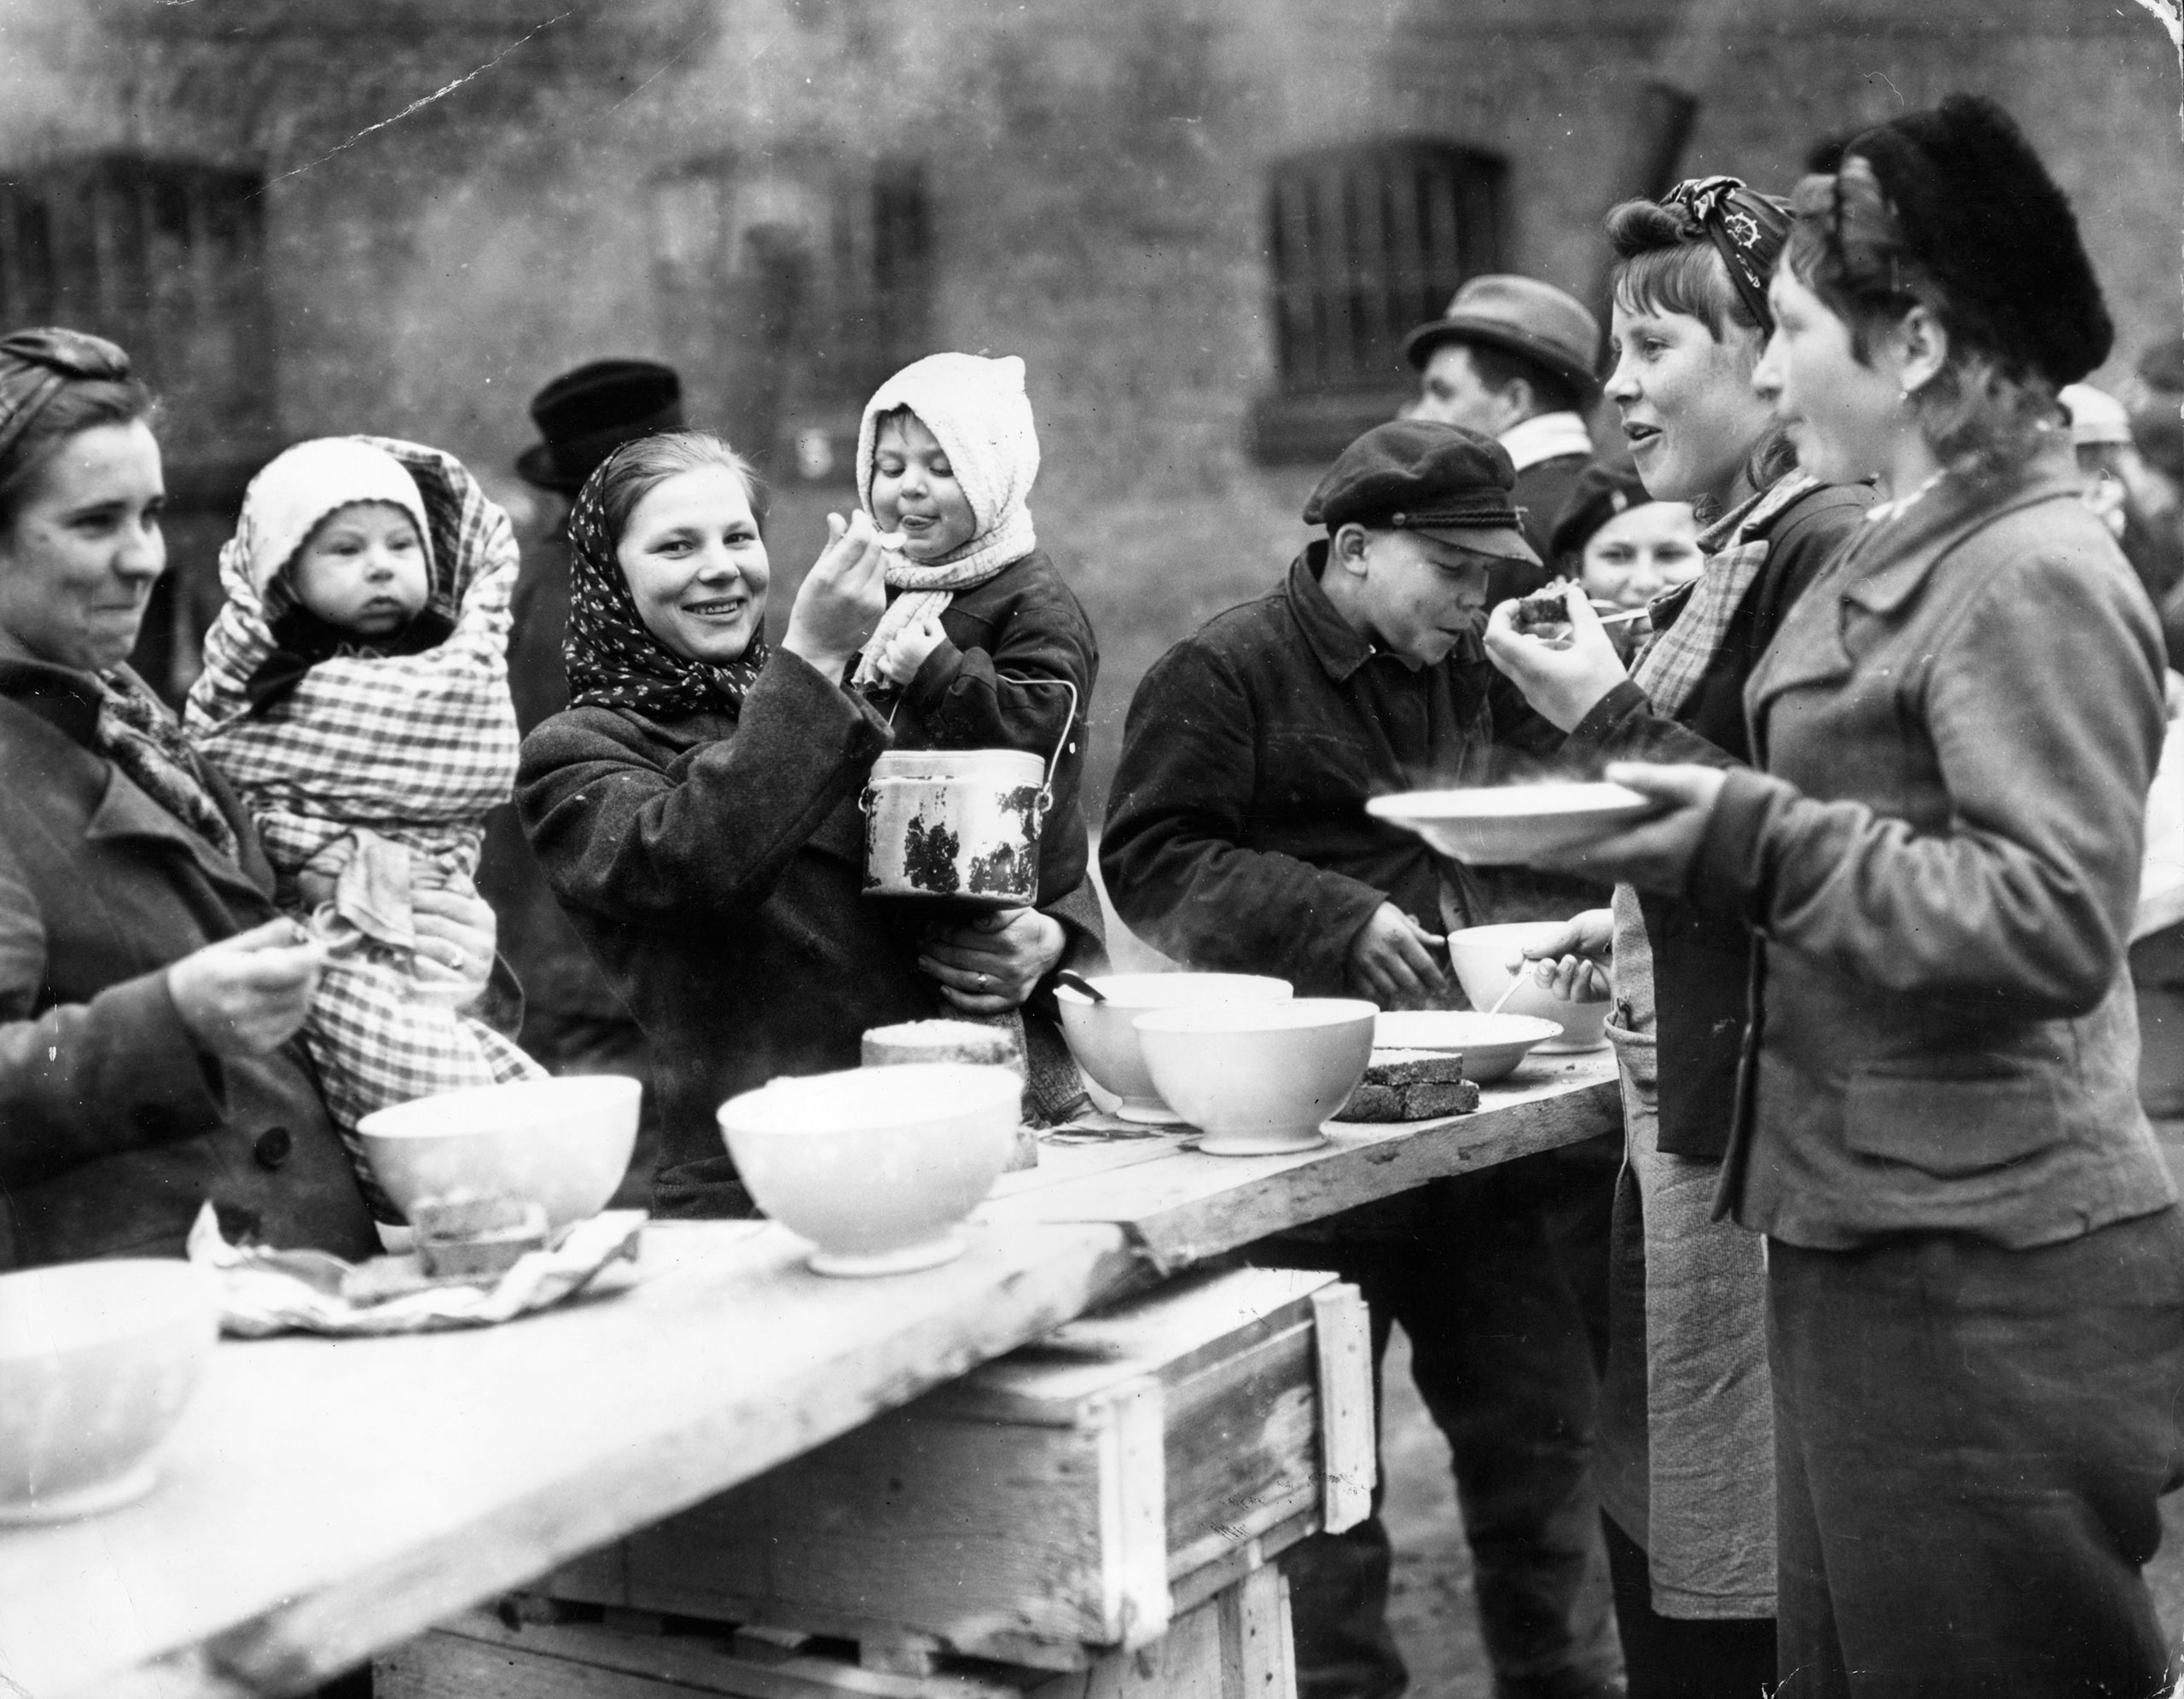 A displaced persons camp in Germany, March, 1945.